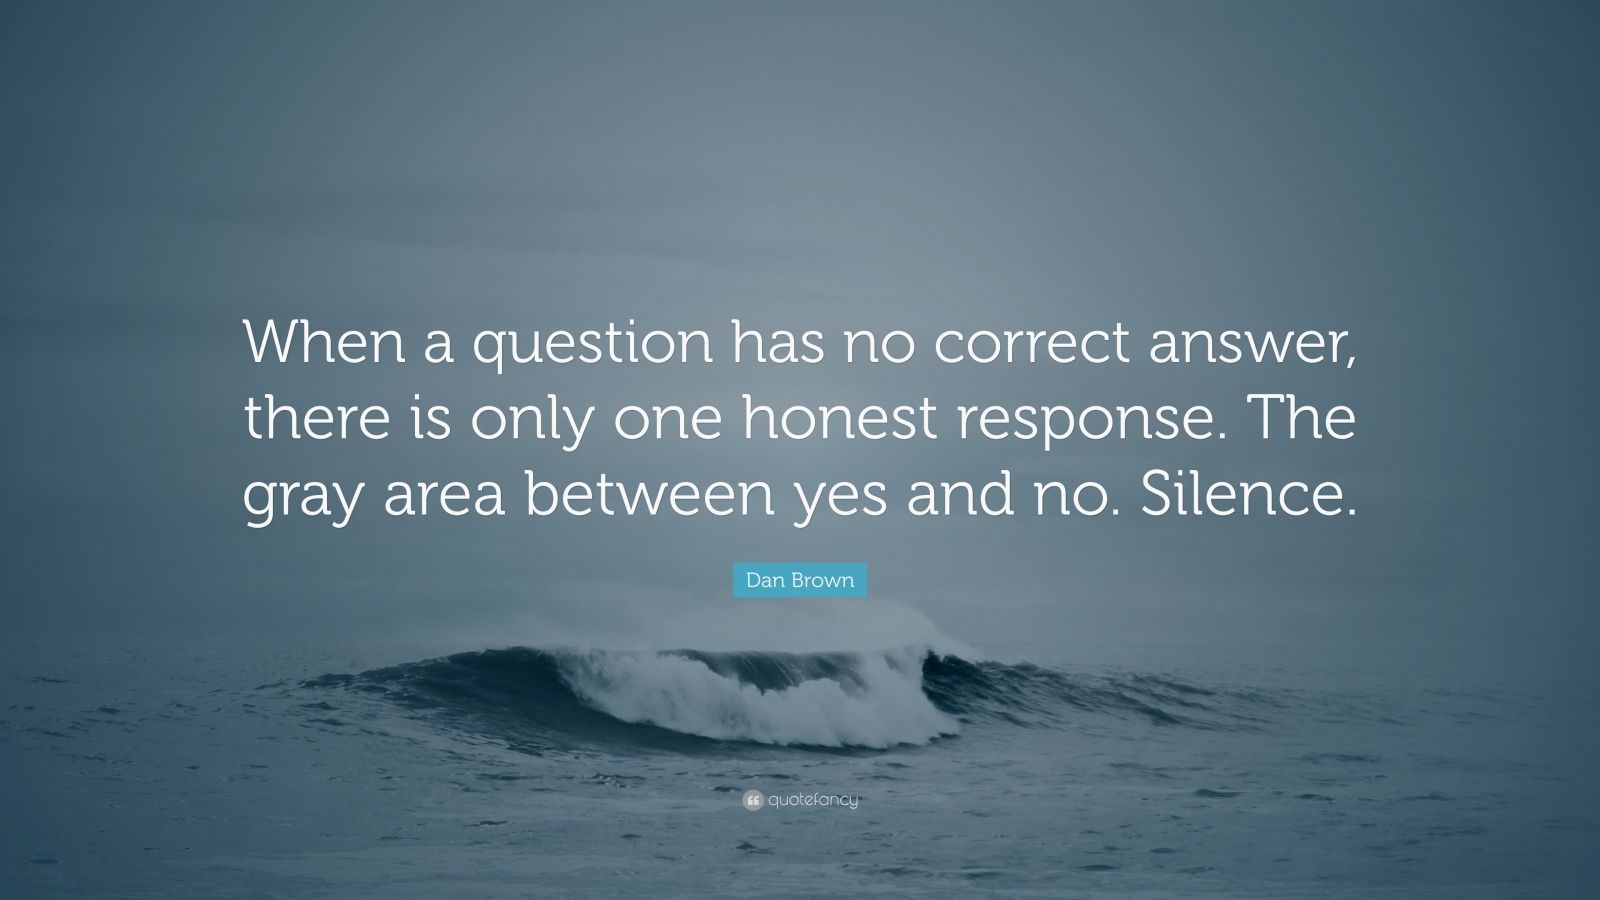 Dan Brown Quote “When a question has no correct answer, there is only